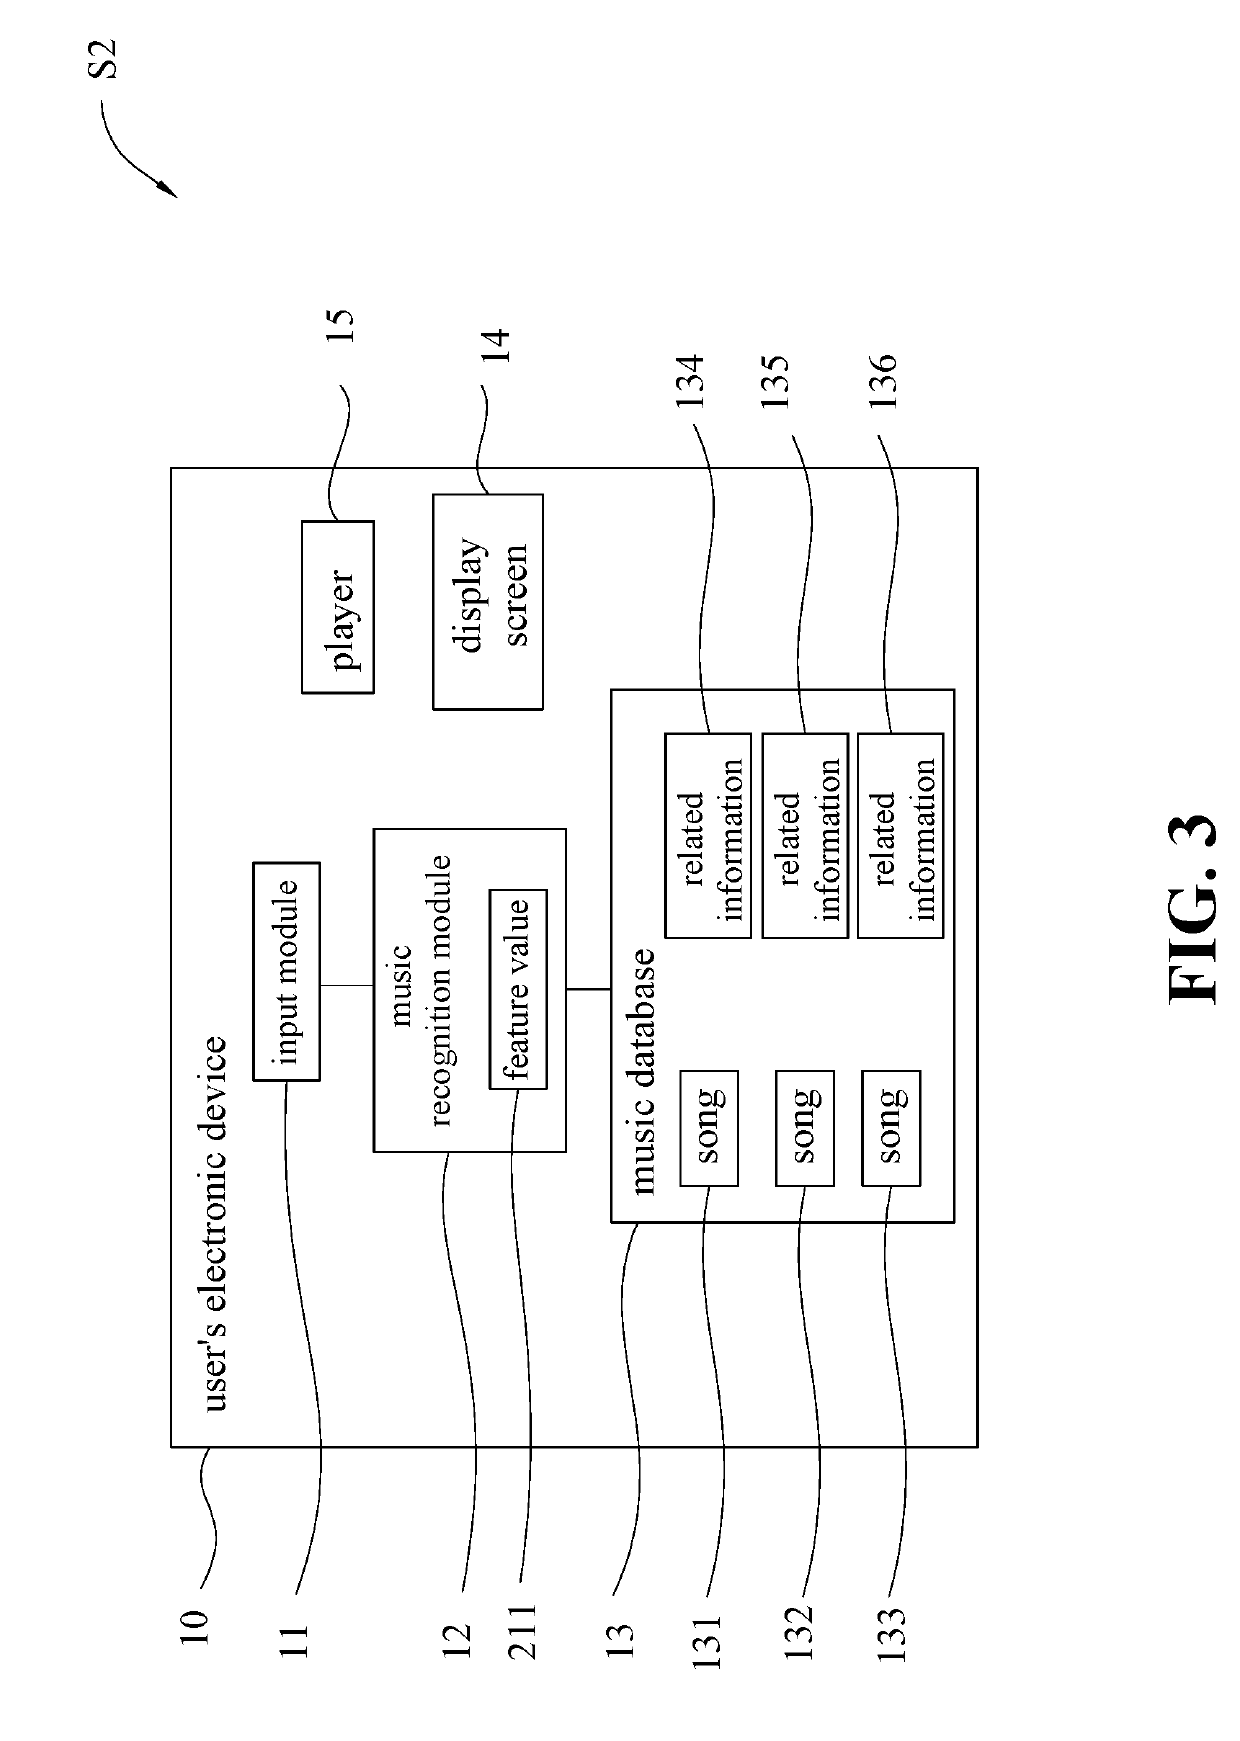 Music sharing method and system